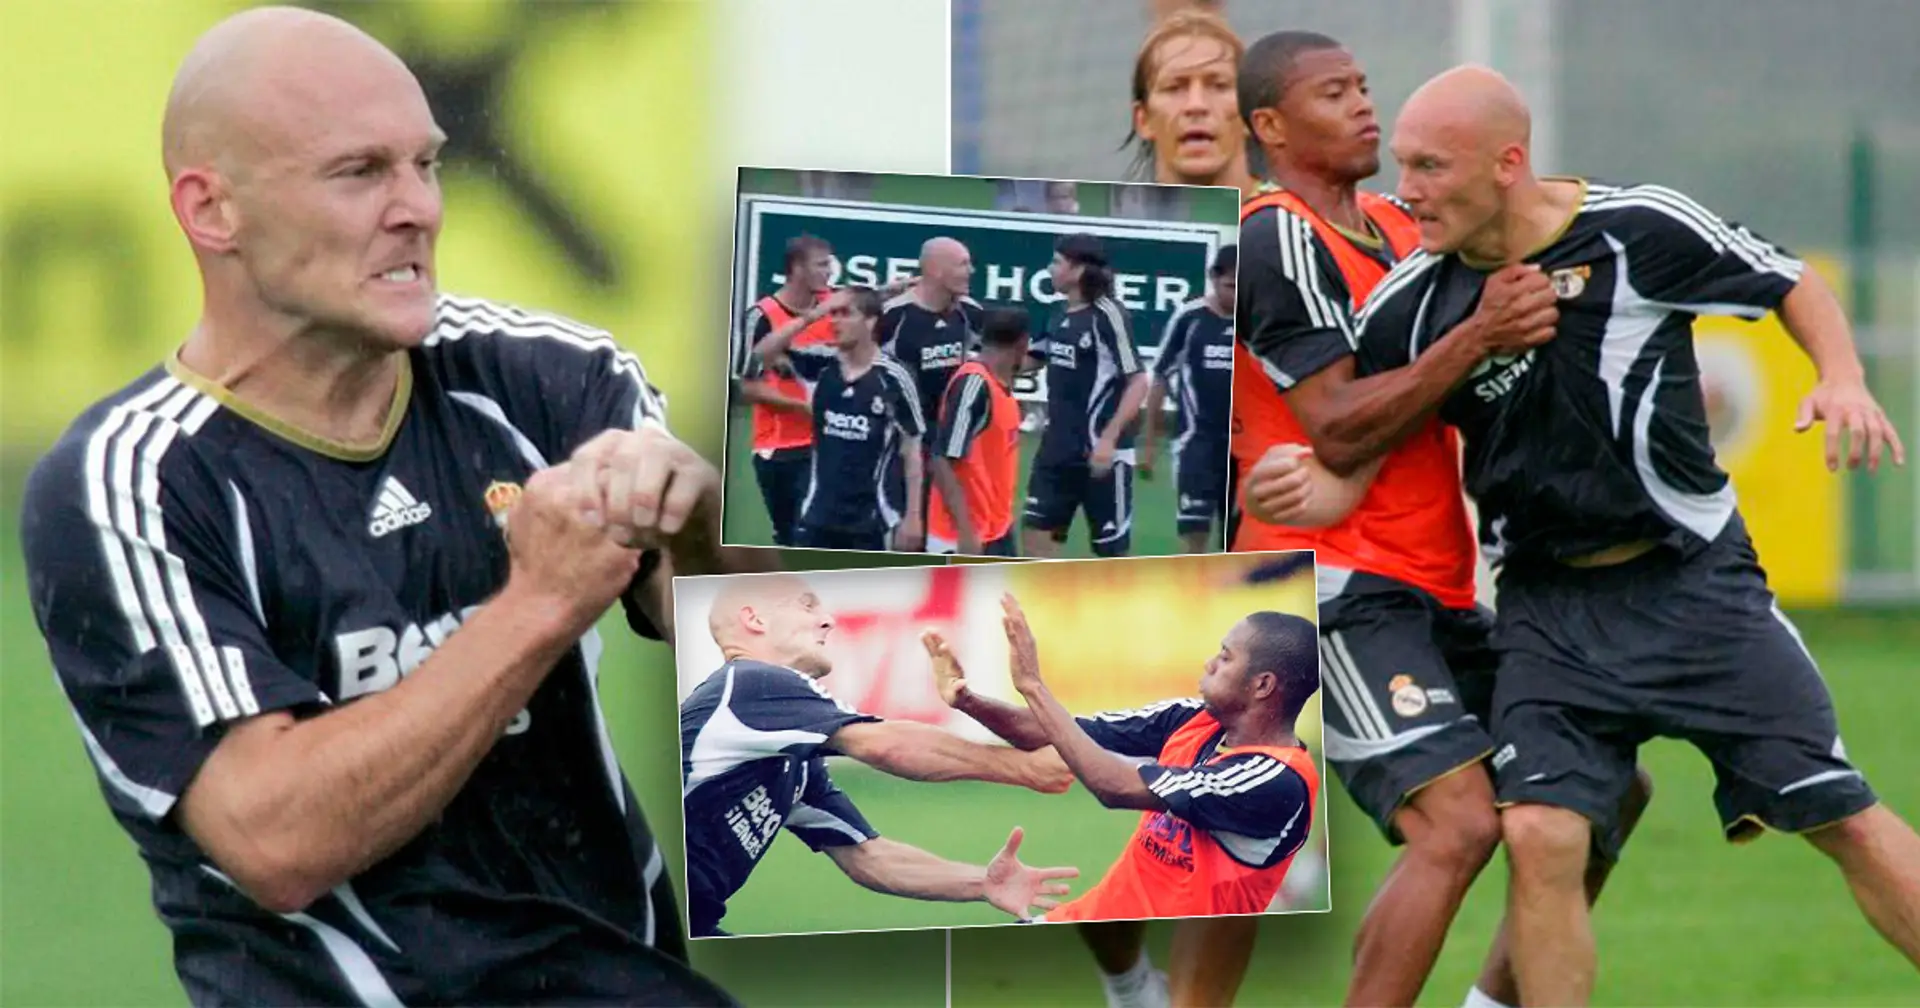 'I'm going to kill him': The reason why Thomas Gravesen wanted to destroy Robinho in a training session